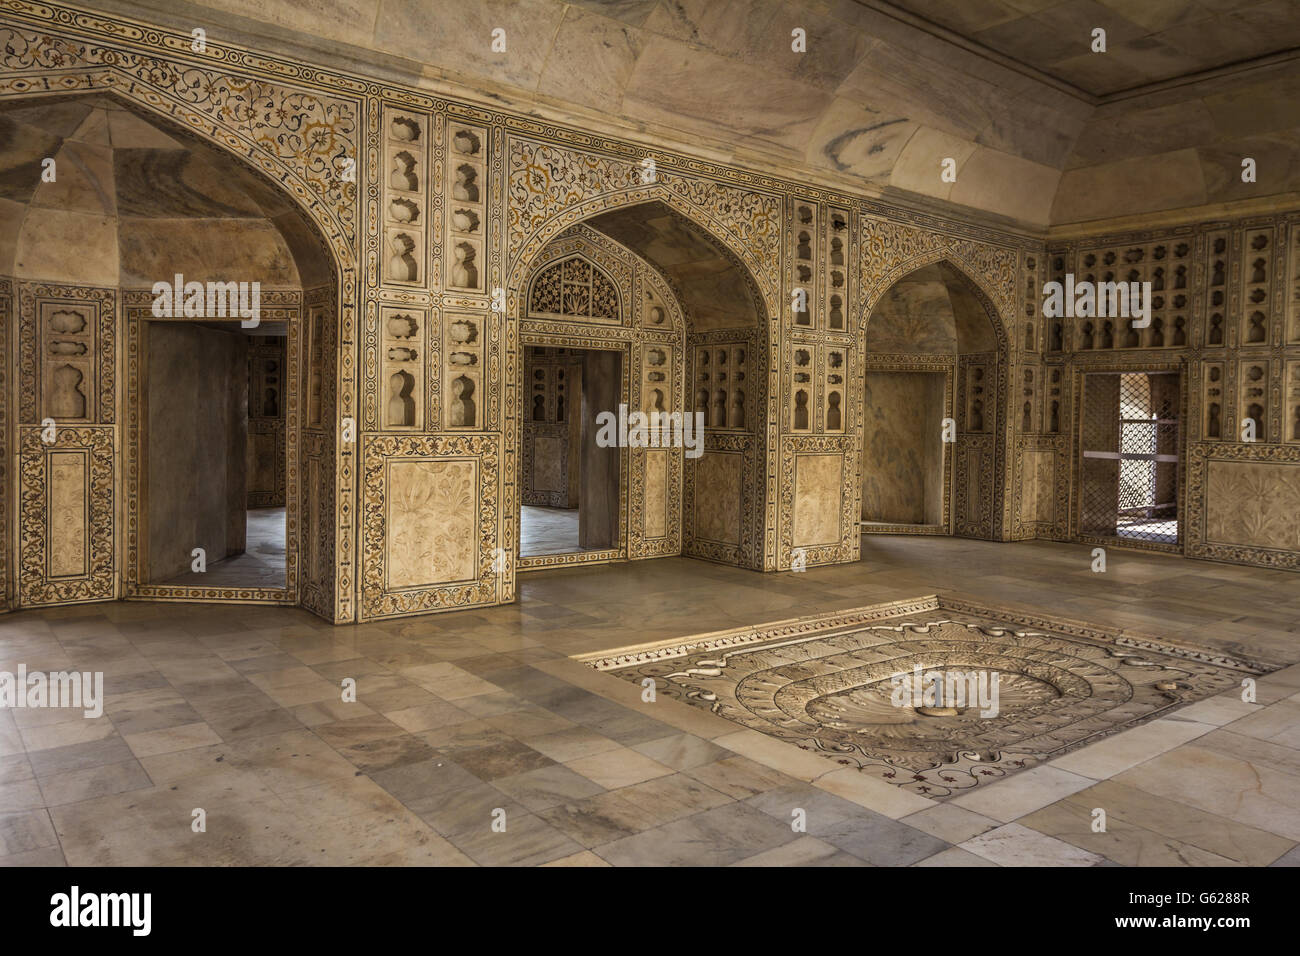 Inside Agra Fort in India Stock Photo